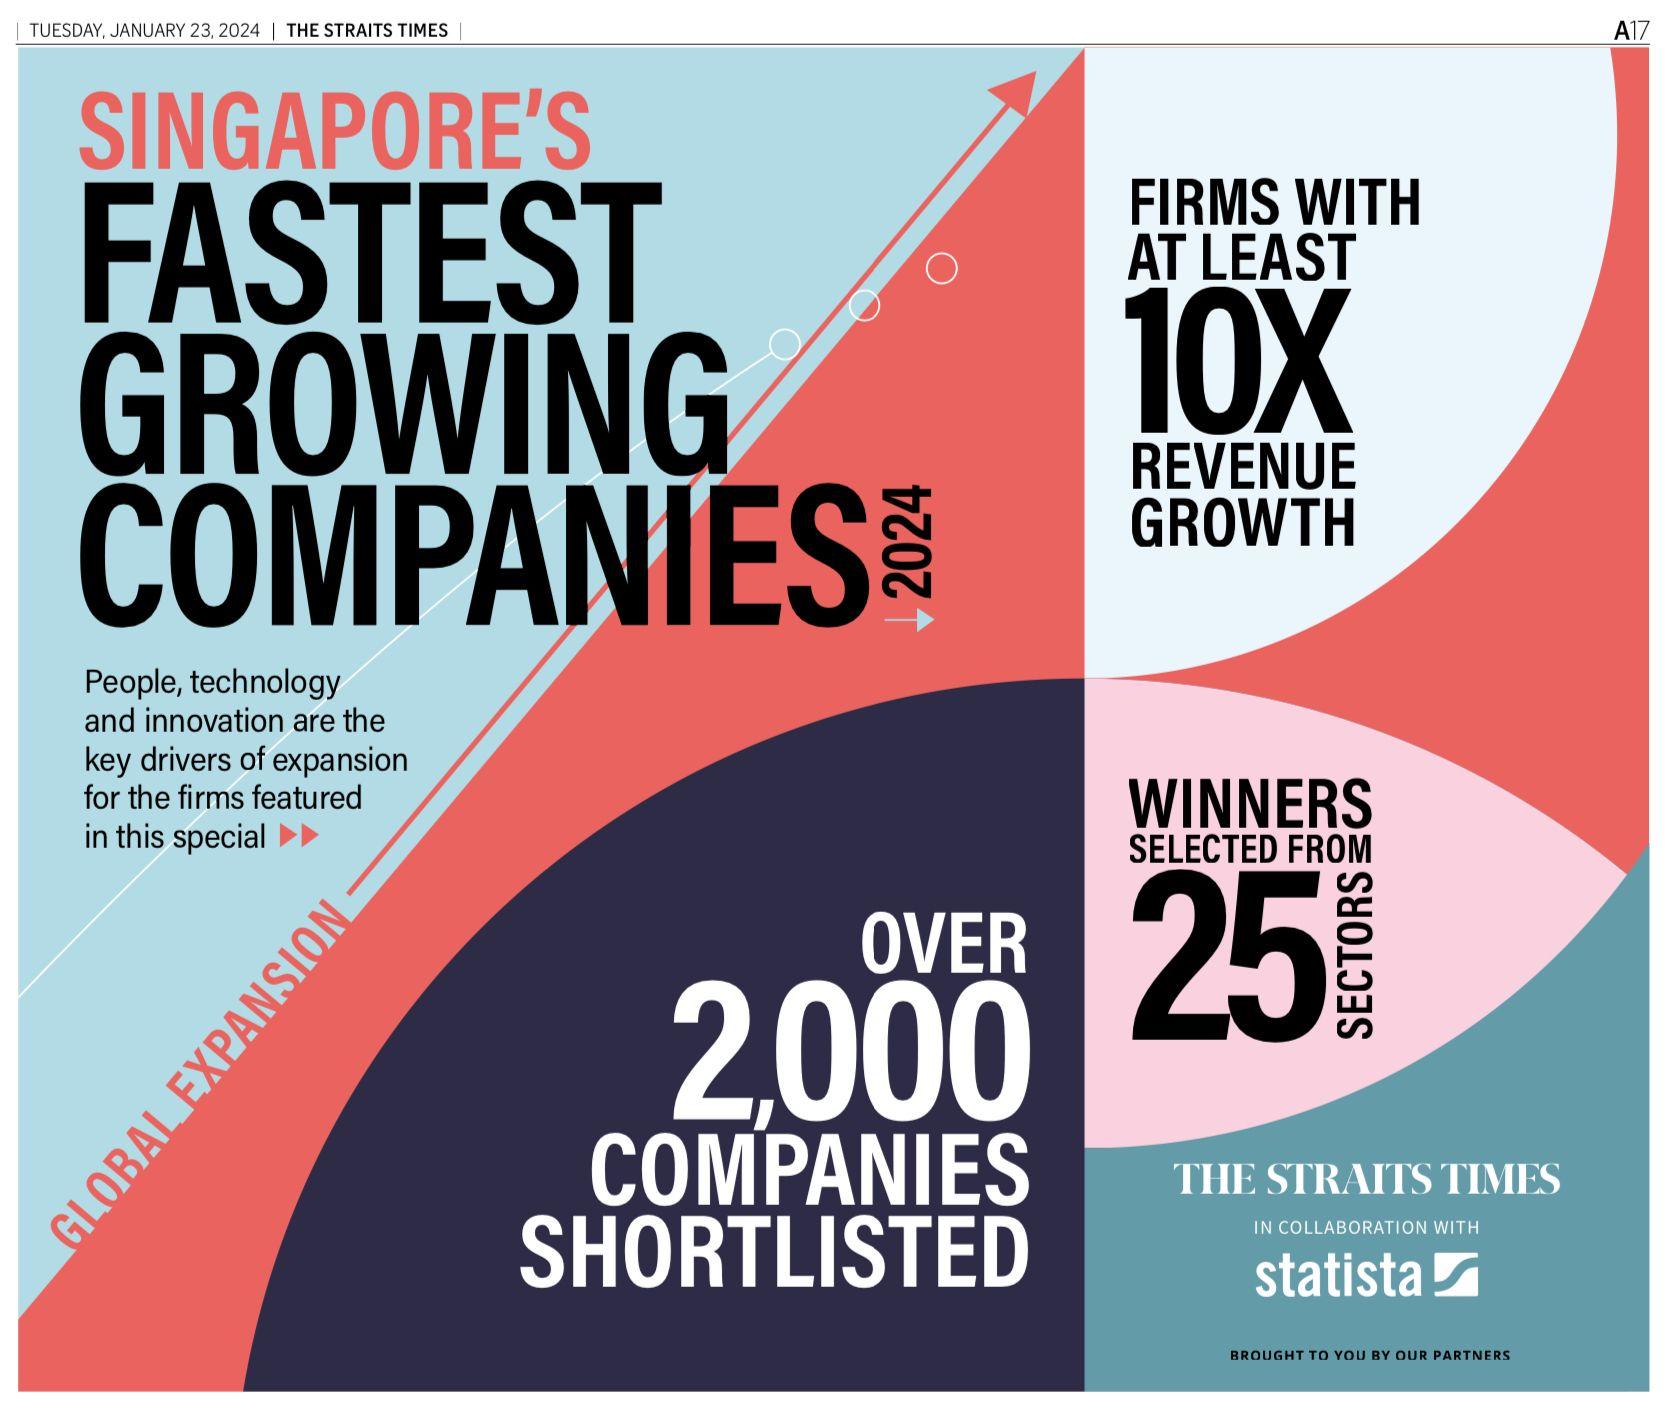 SYNERGY is recognised as one of Singapore’s Fastest-Growing Companies for the year 2024!